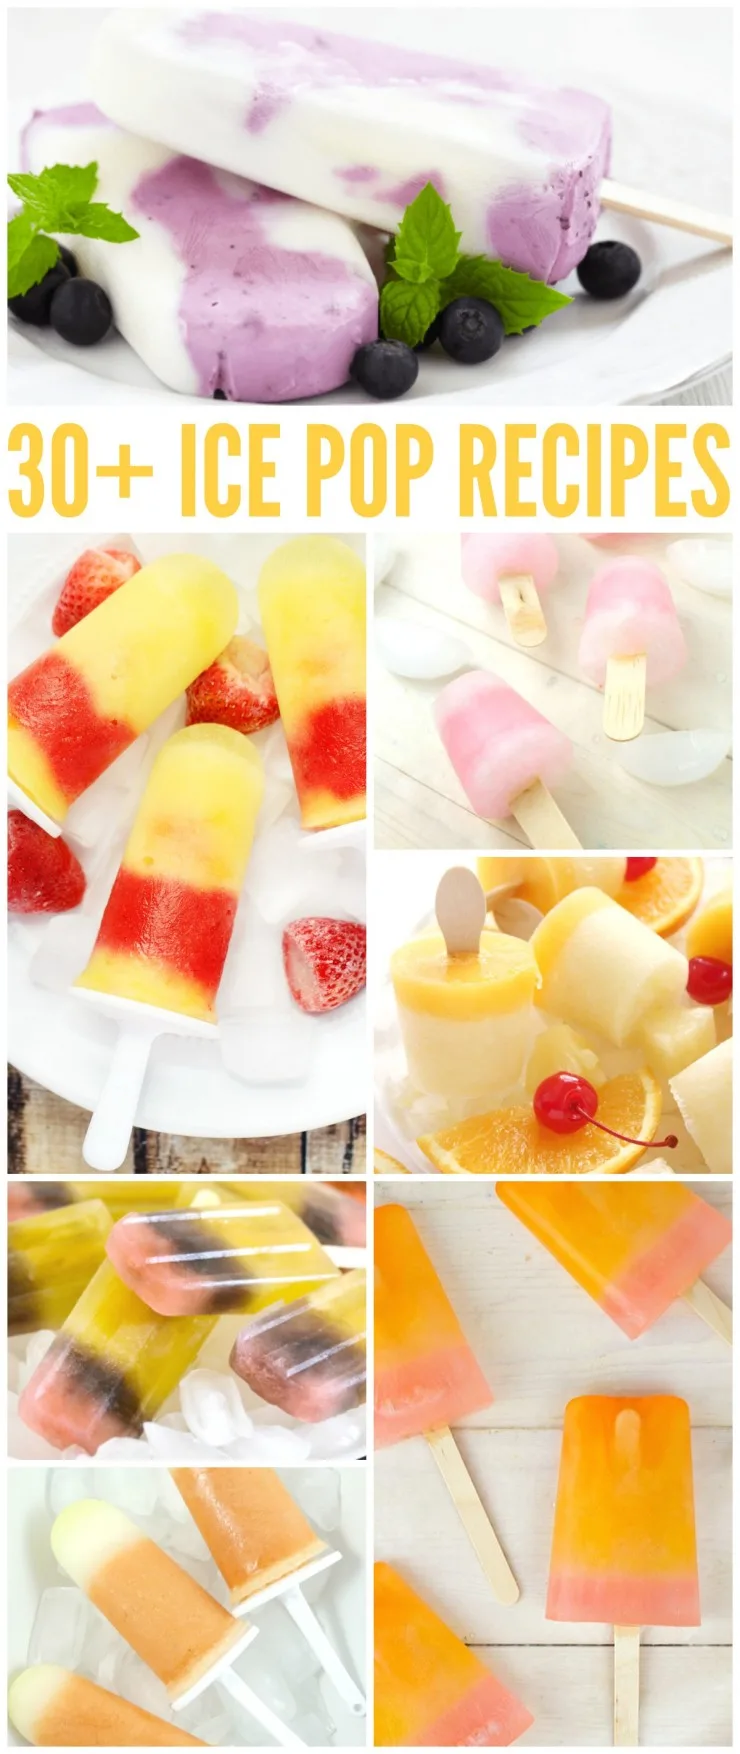 We love making and eating homemade ice pops in my house. My kids can't get enough of this classic summer treat which is why I love making my own ice pops with fresh fruit and juice. Check out these 30+ ice pop recipes for inspiration!